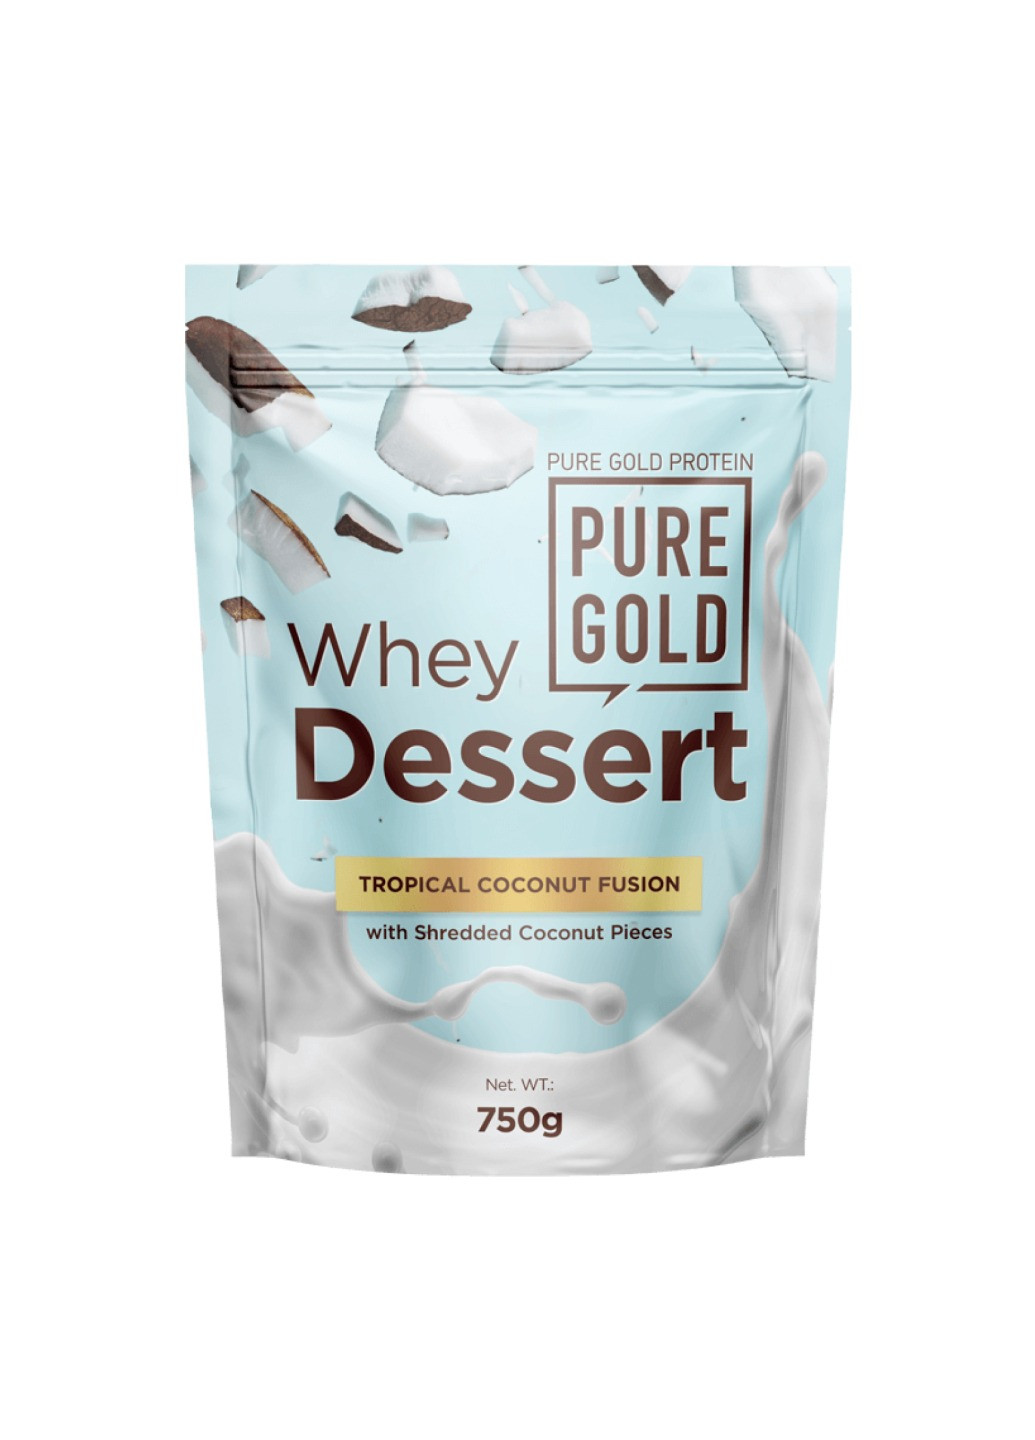 Whey Dessert - 750g Tropical Coconut Fusion Pure Gold Protein (258463751)